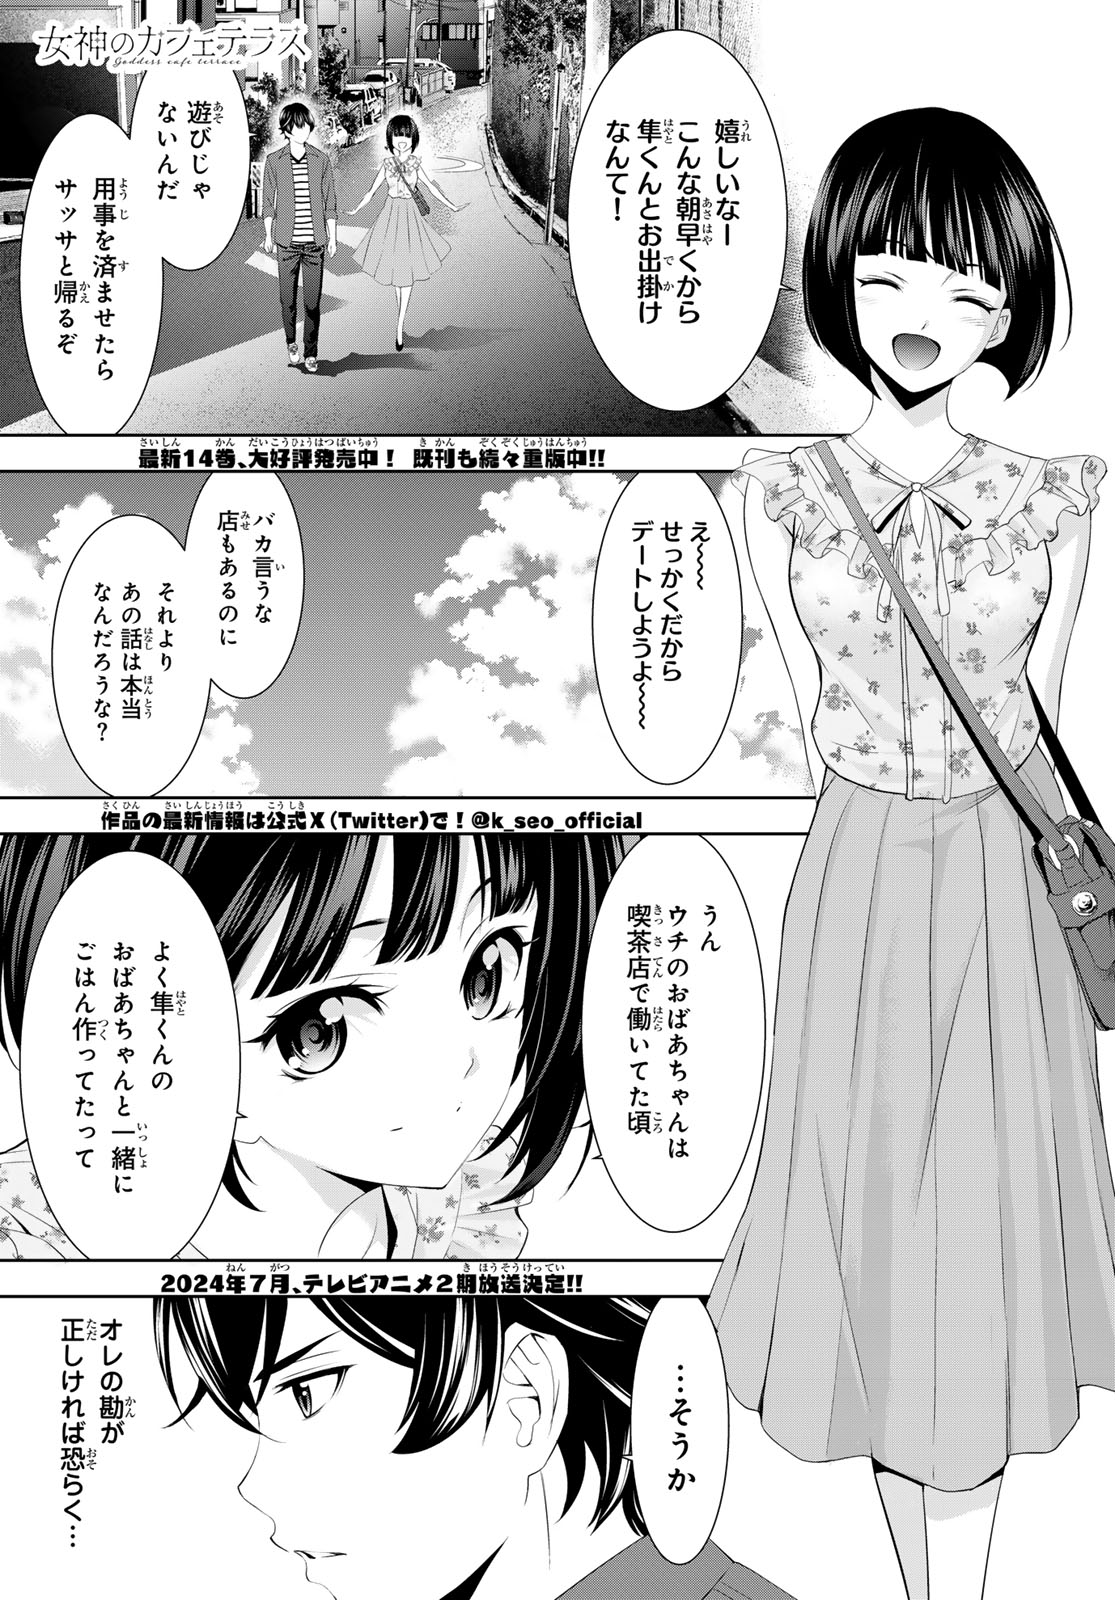 Megami no Cafe Terace - Chapter 141 - Page 2